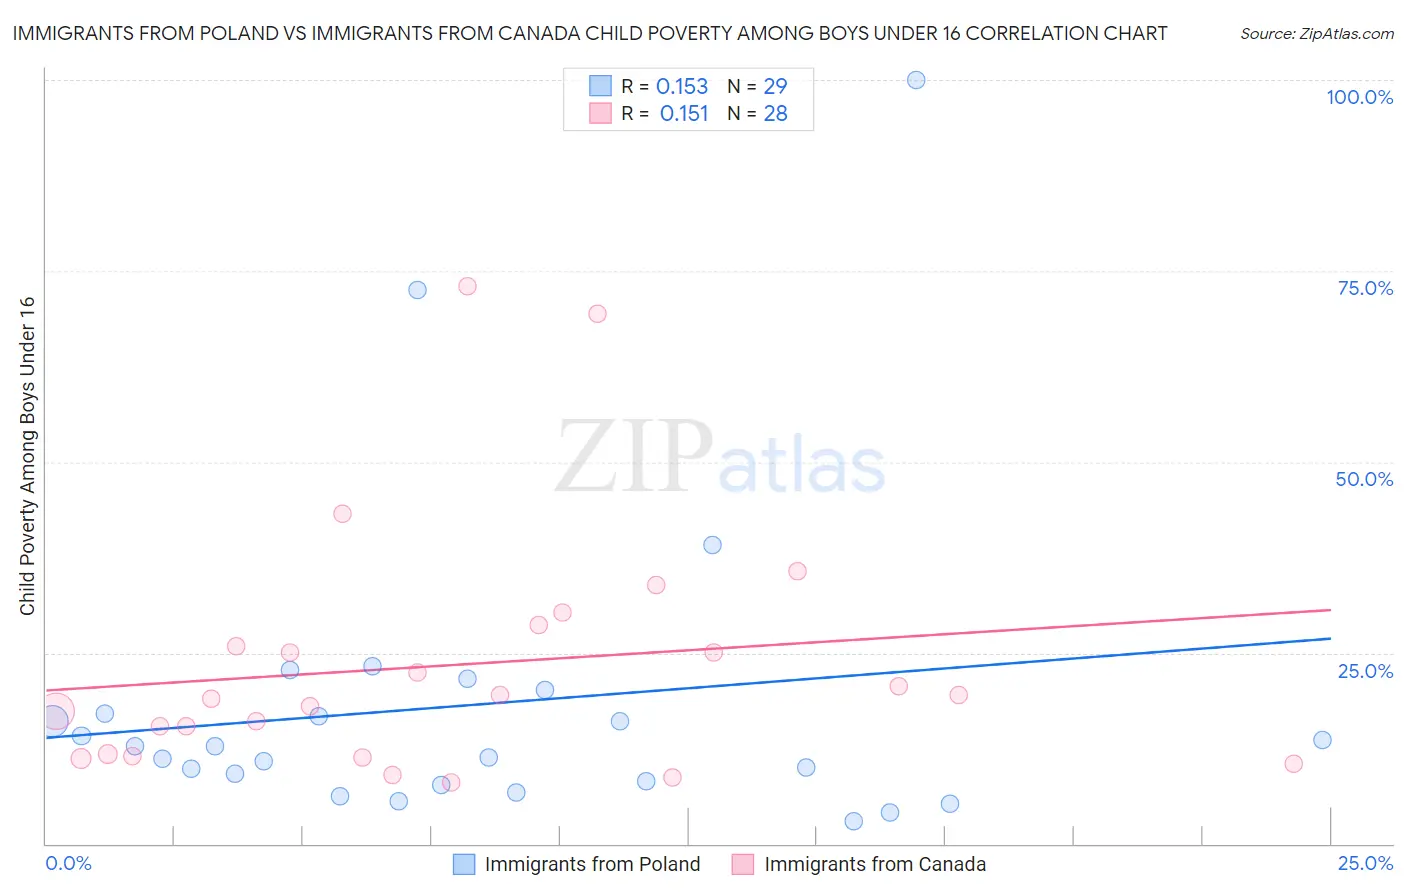 Immigrants from Poland vs Immigrants from Canada Child Poverty Among Boys Under 16